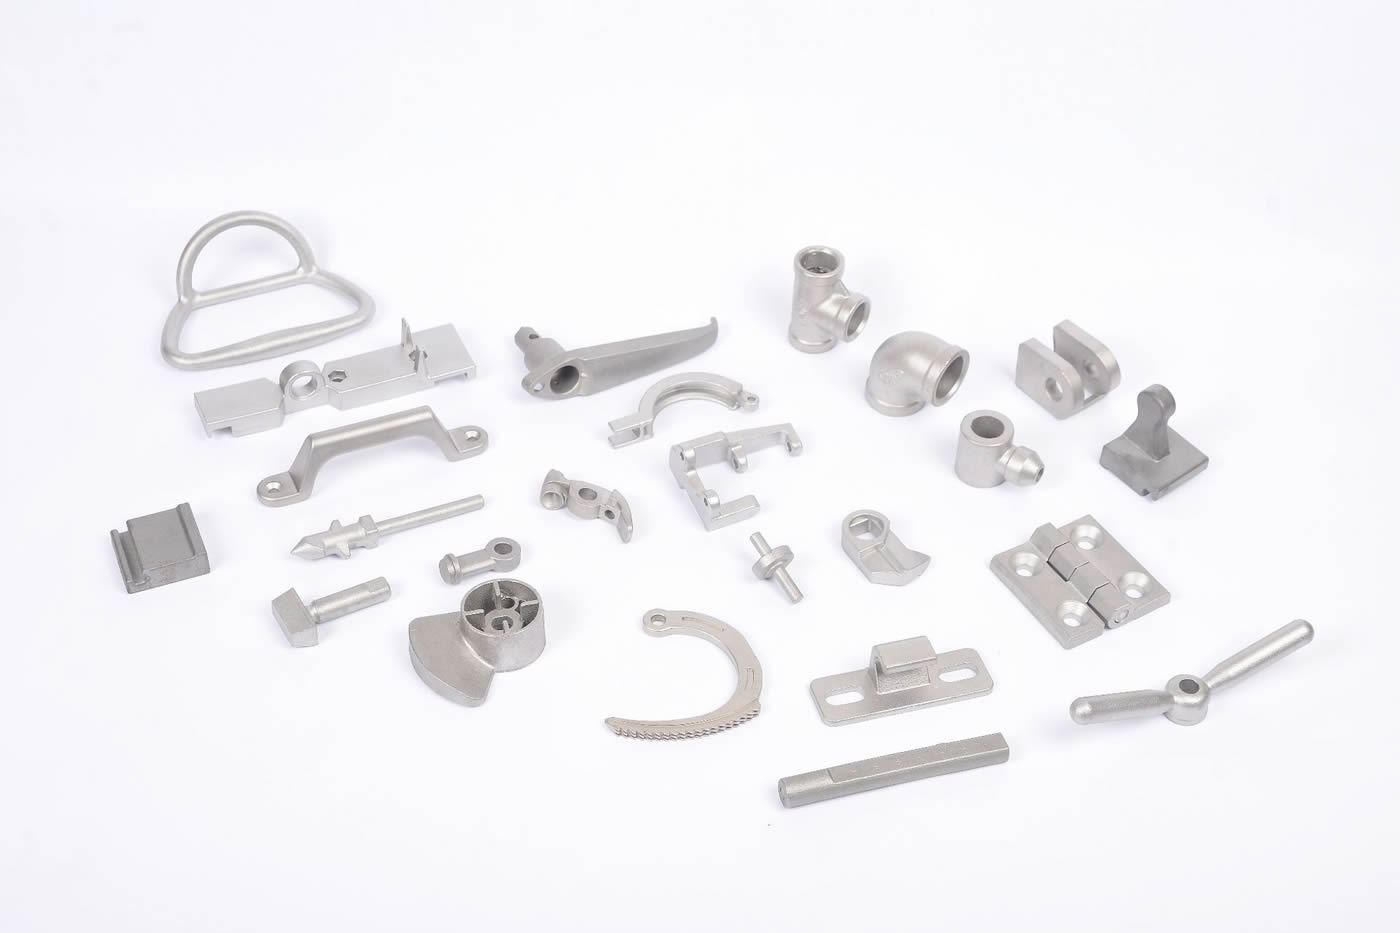 Casting Products Manufacturers: Pioneers of Precision and Innovation